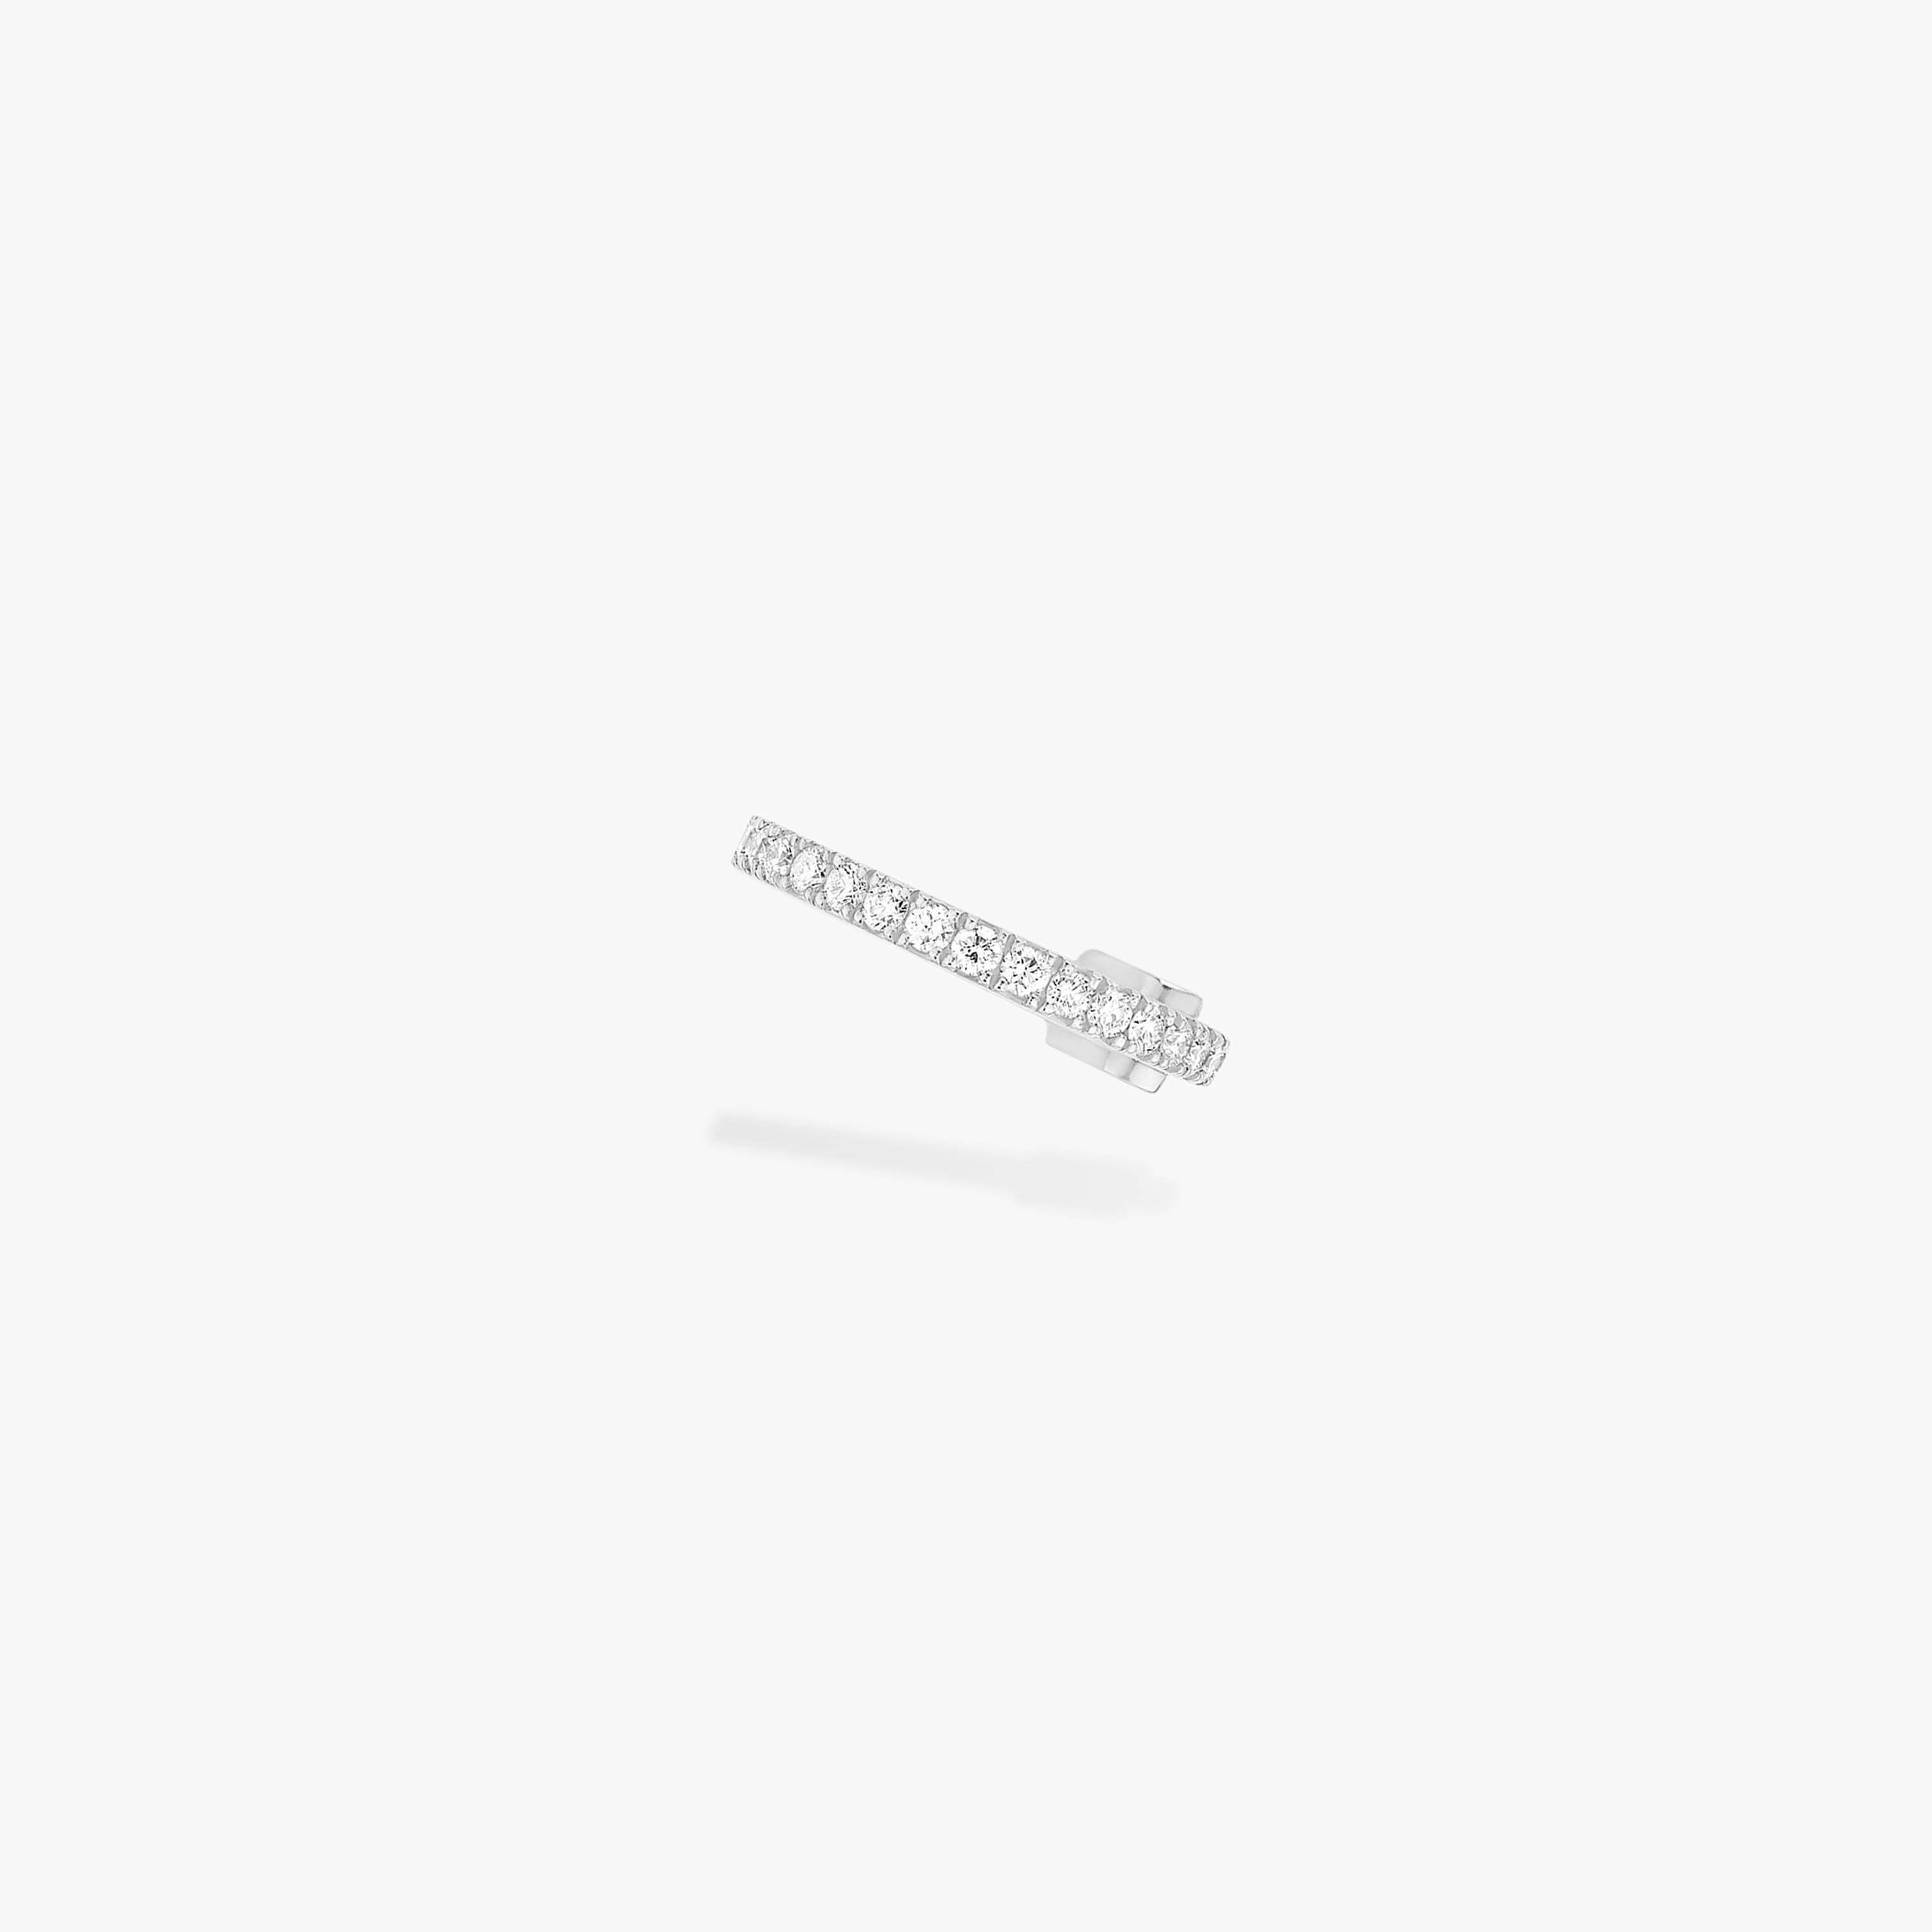 Gatsby Mono Clip Middle  White Gold For Her Diamond Earrings 10031-WG